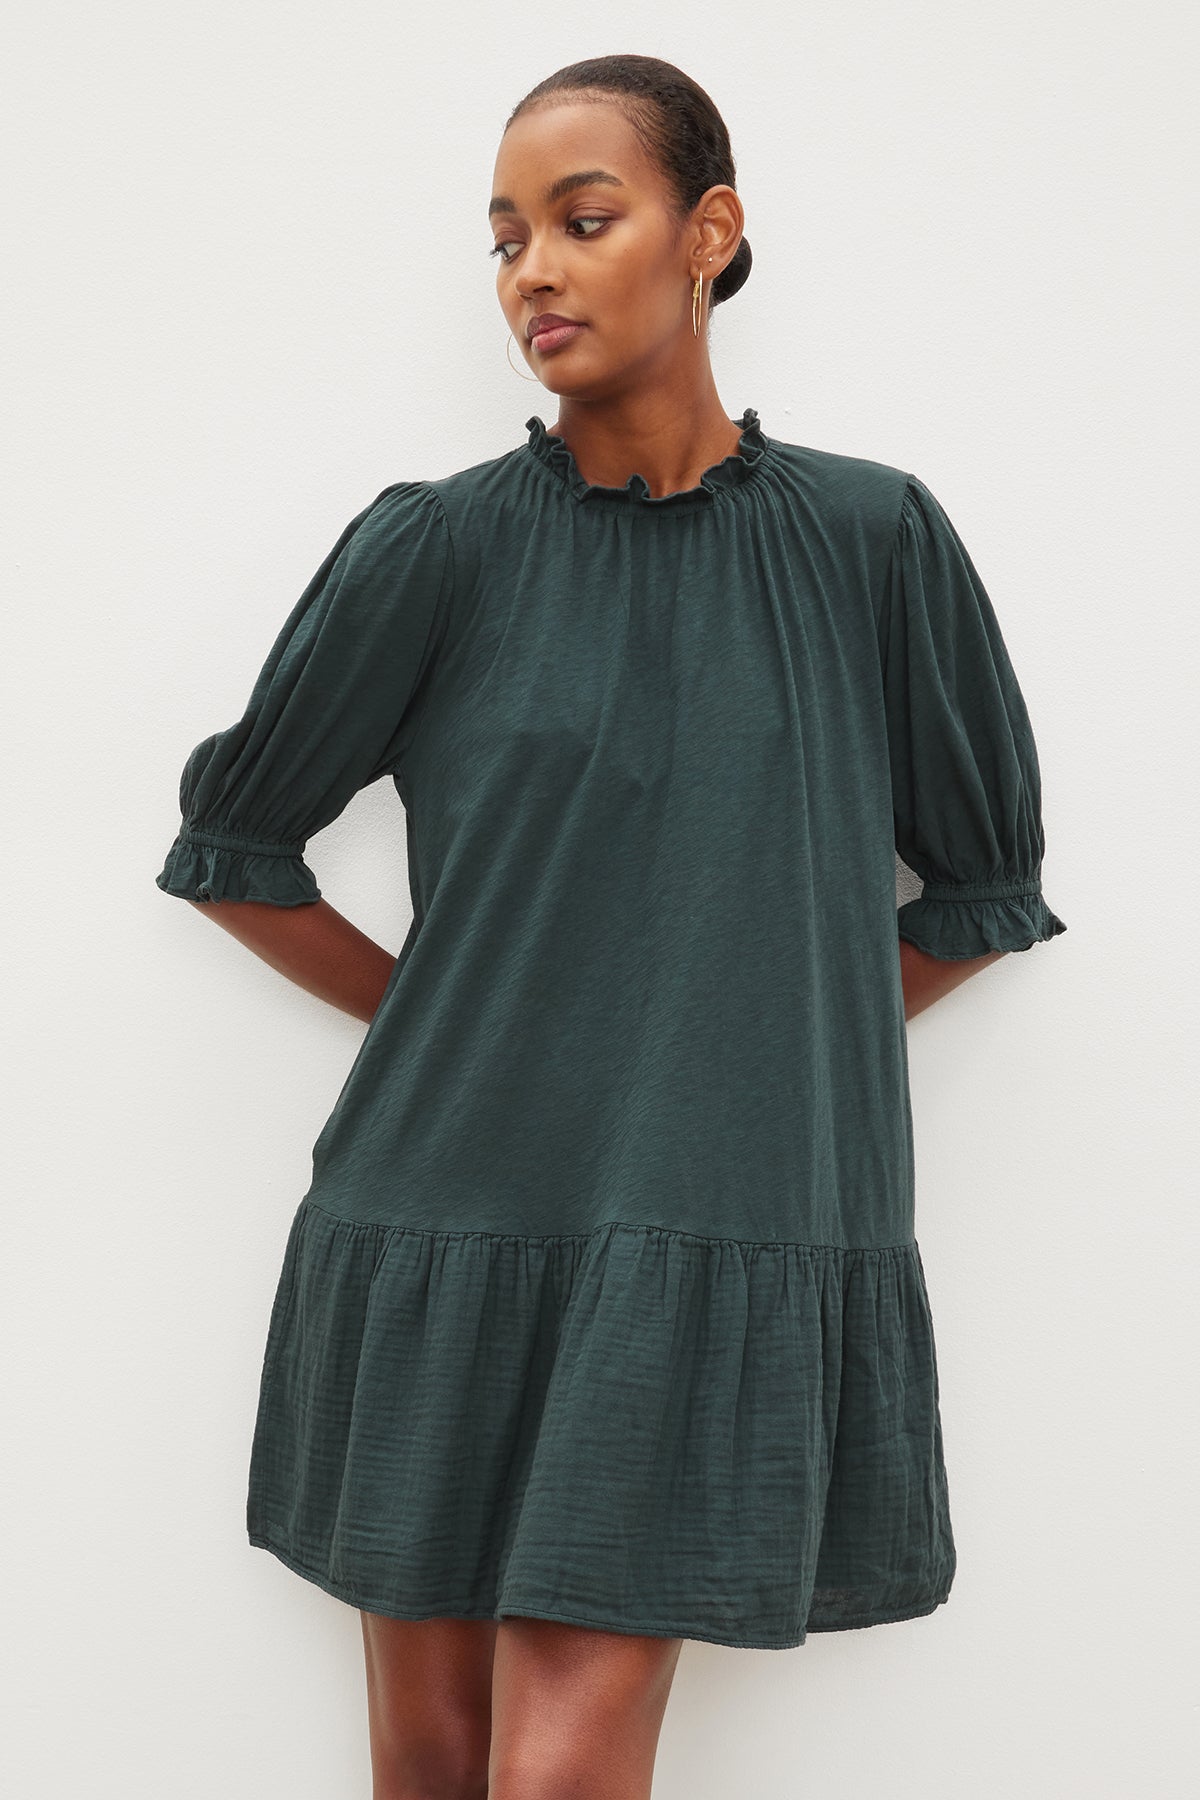 The model is wearing a Velvet by Graham & Spencer green Dillon tiered dress with ruffled sleeves.-26839866671297